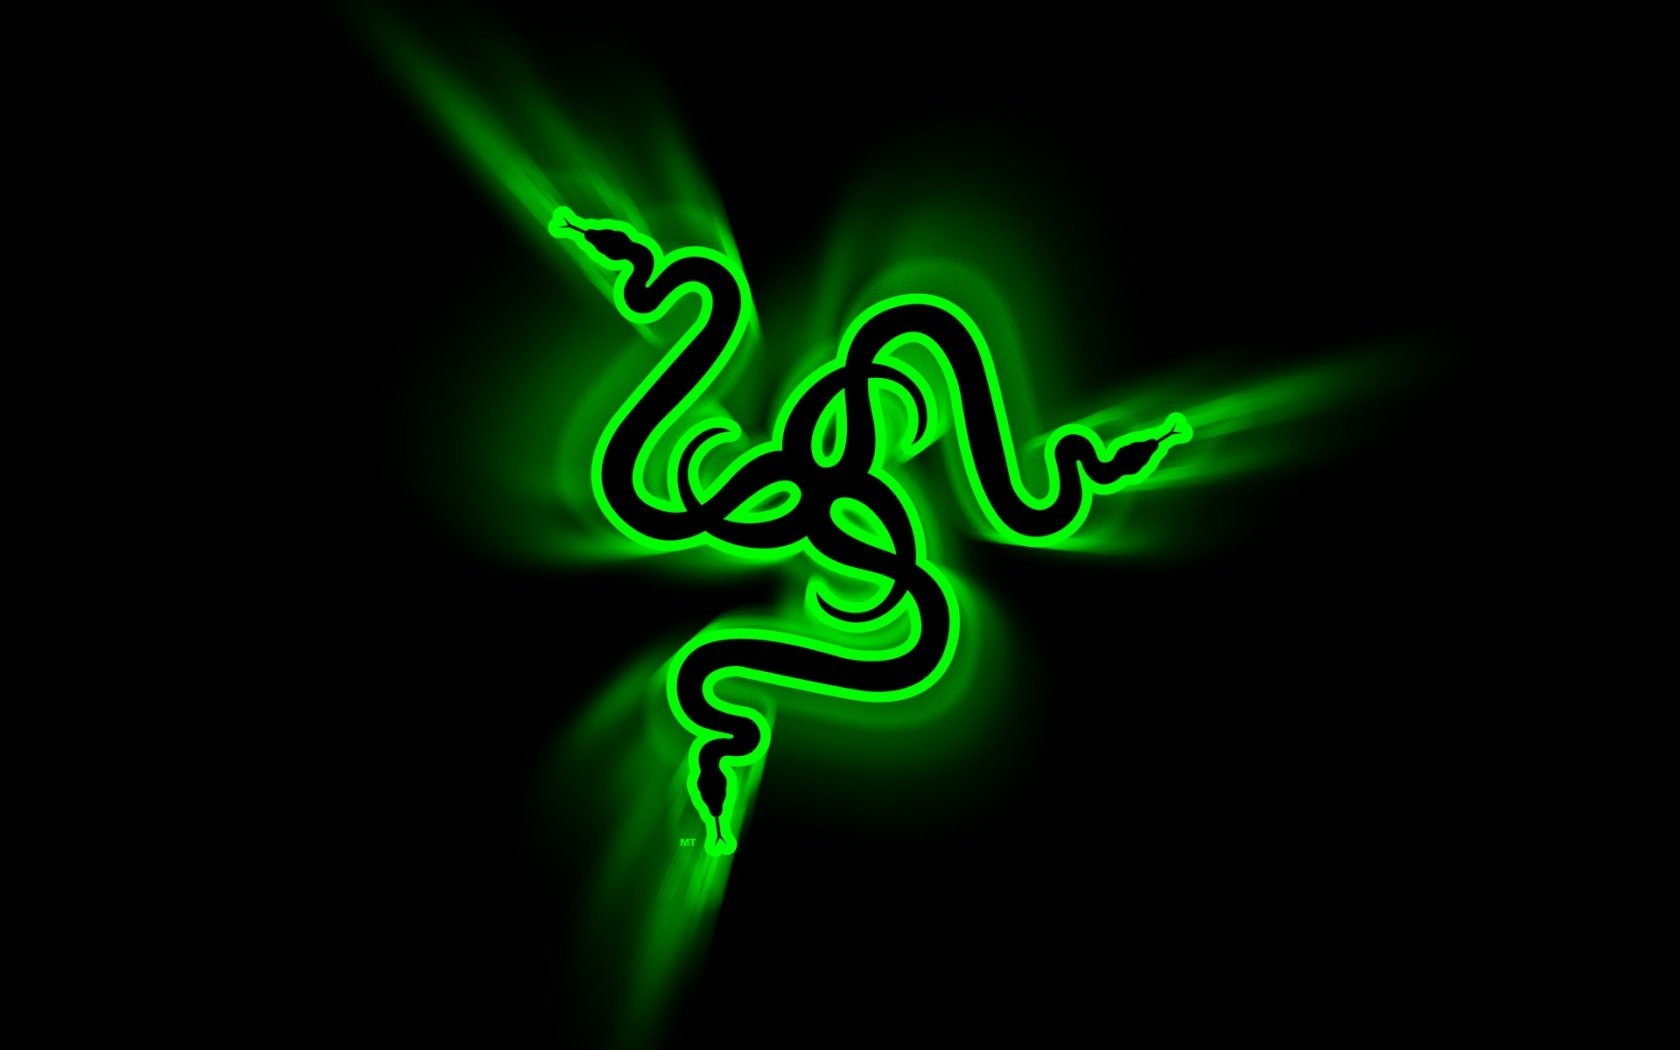 razer iphone wallpaper 9   flipped Images And Wallpapers   all 1680x1050